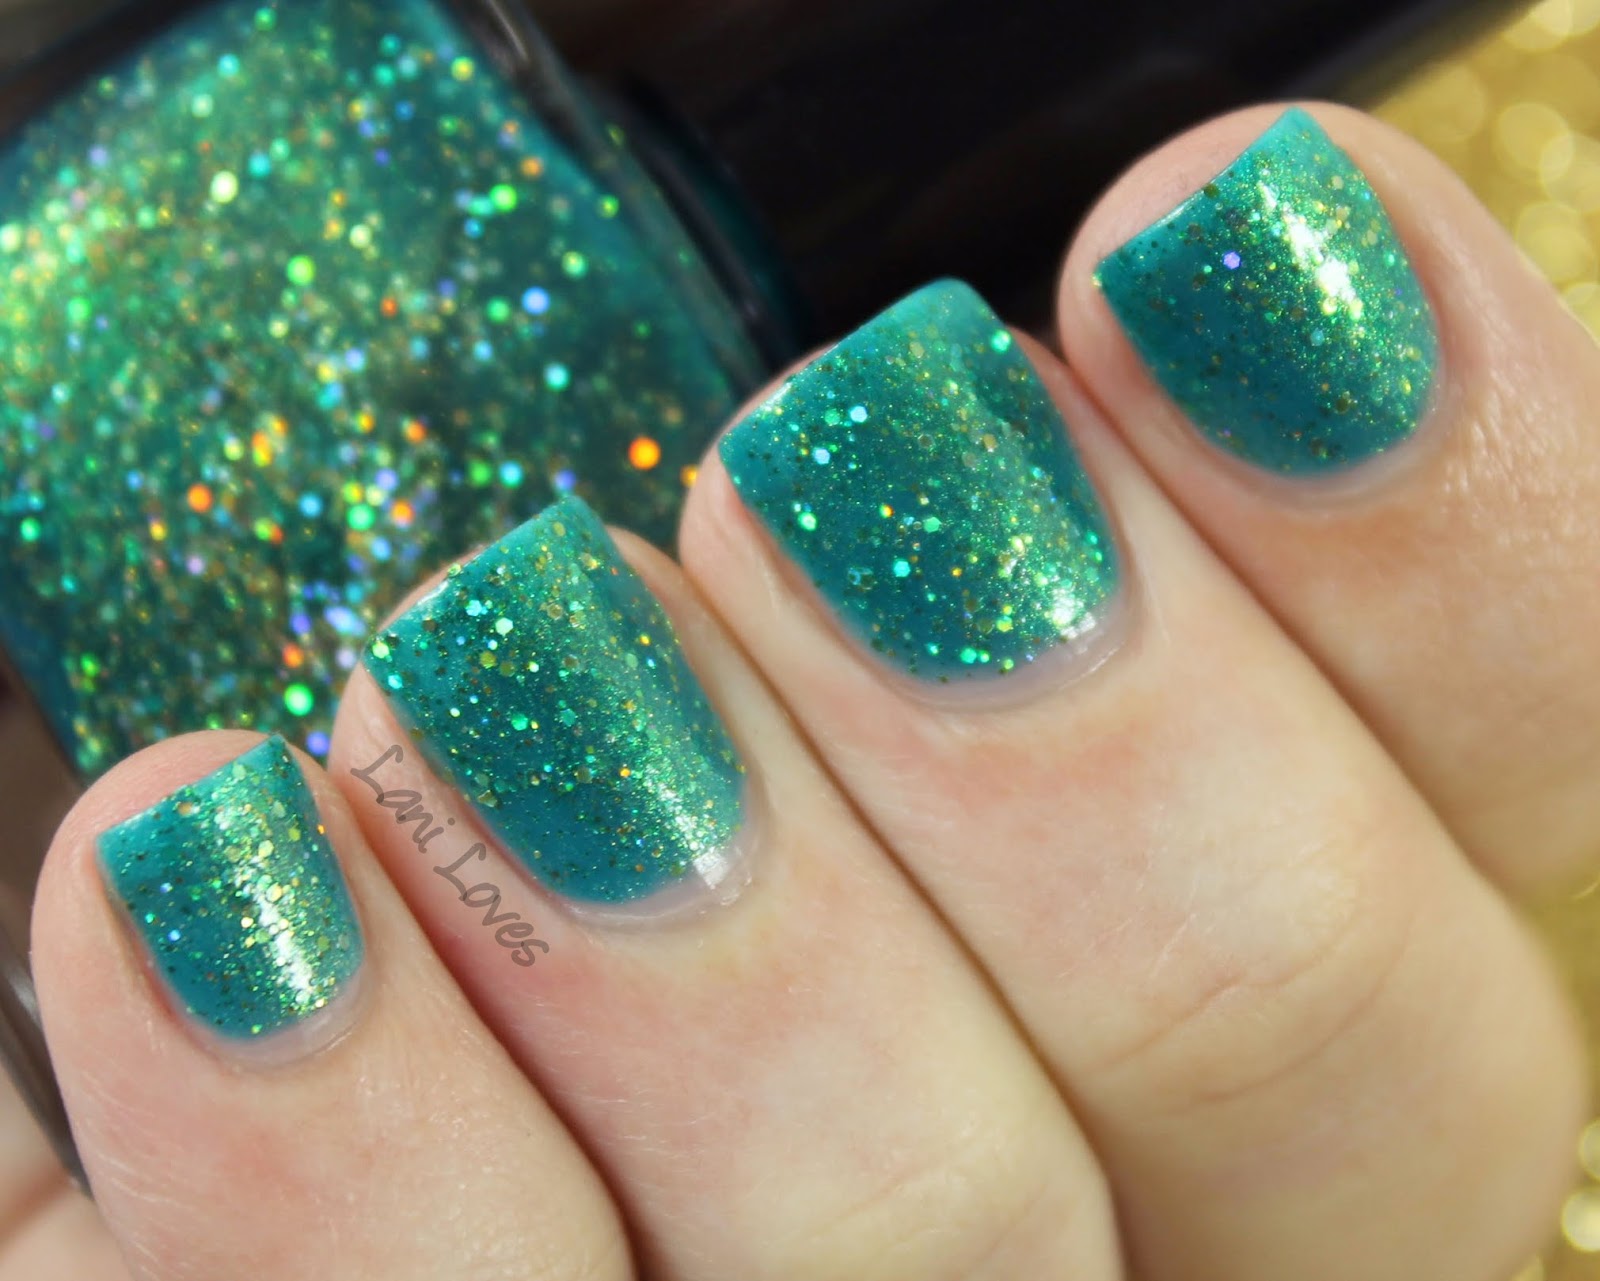 Femme Fatale Cosmetics Stand in the Clouds nail polish swatches & review